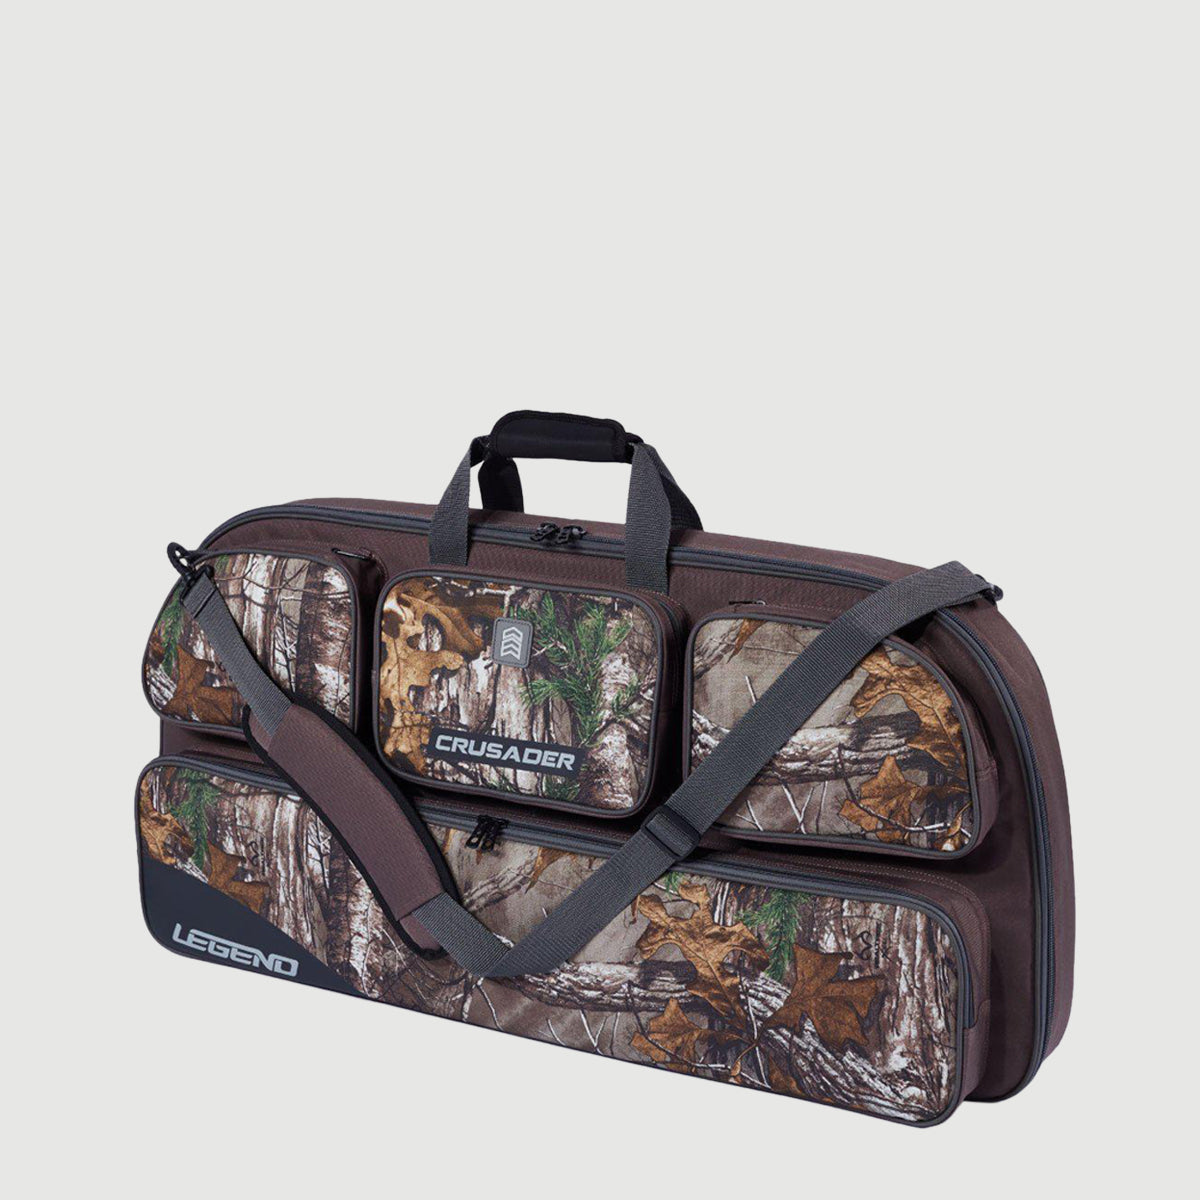 Crusader Bow Case - Camo Protection for Your Compound Bow